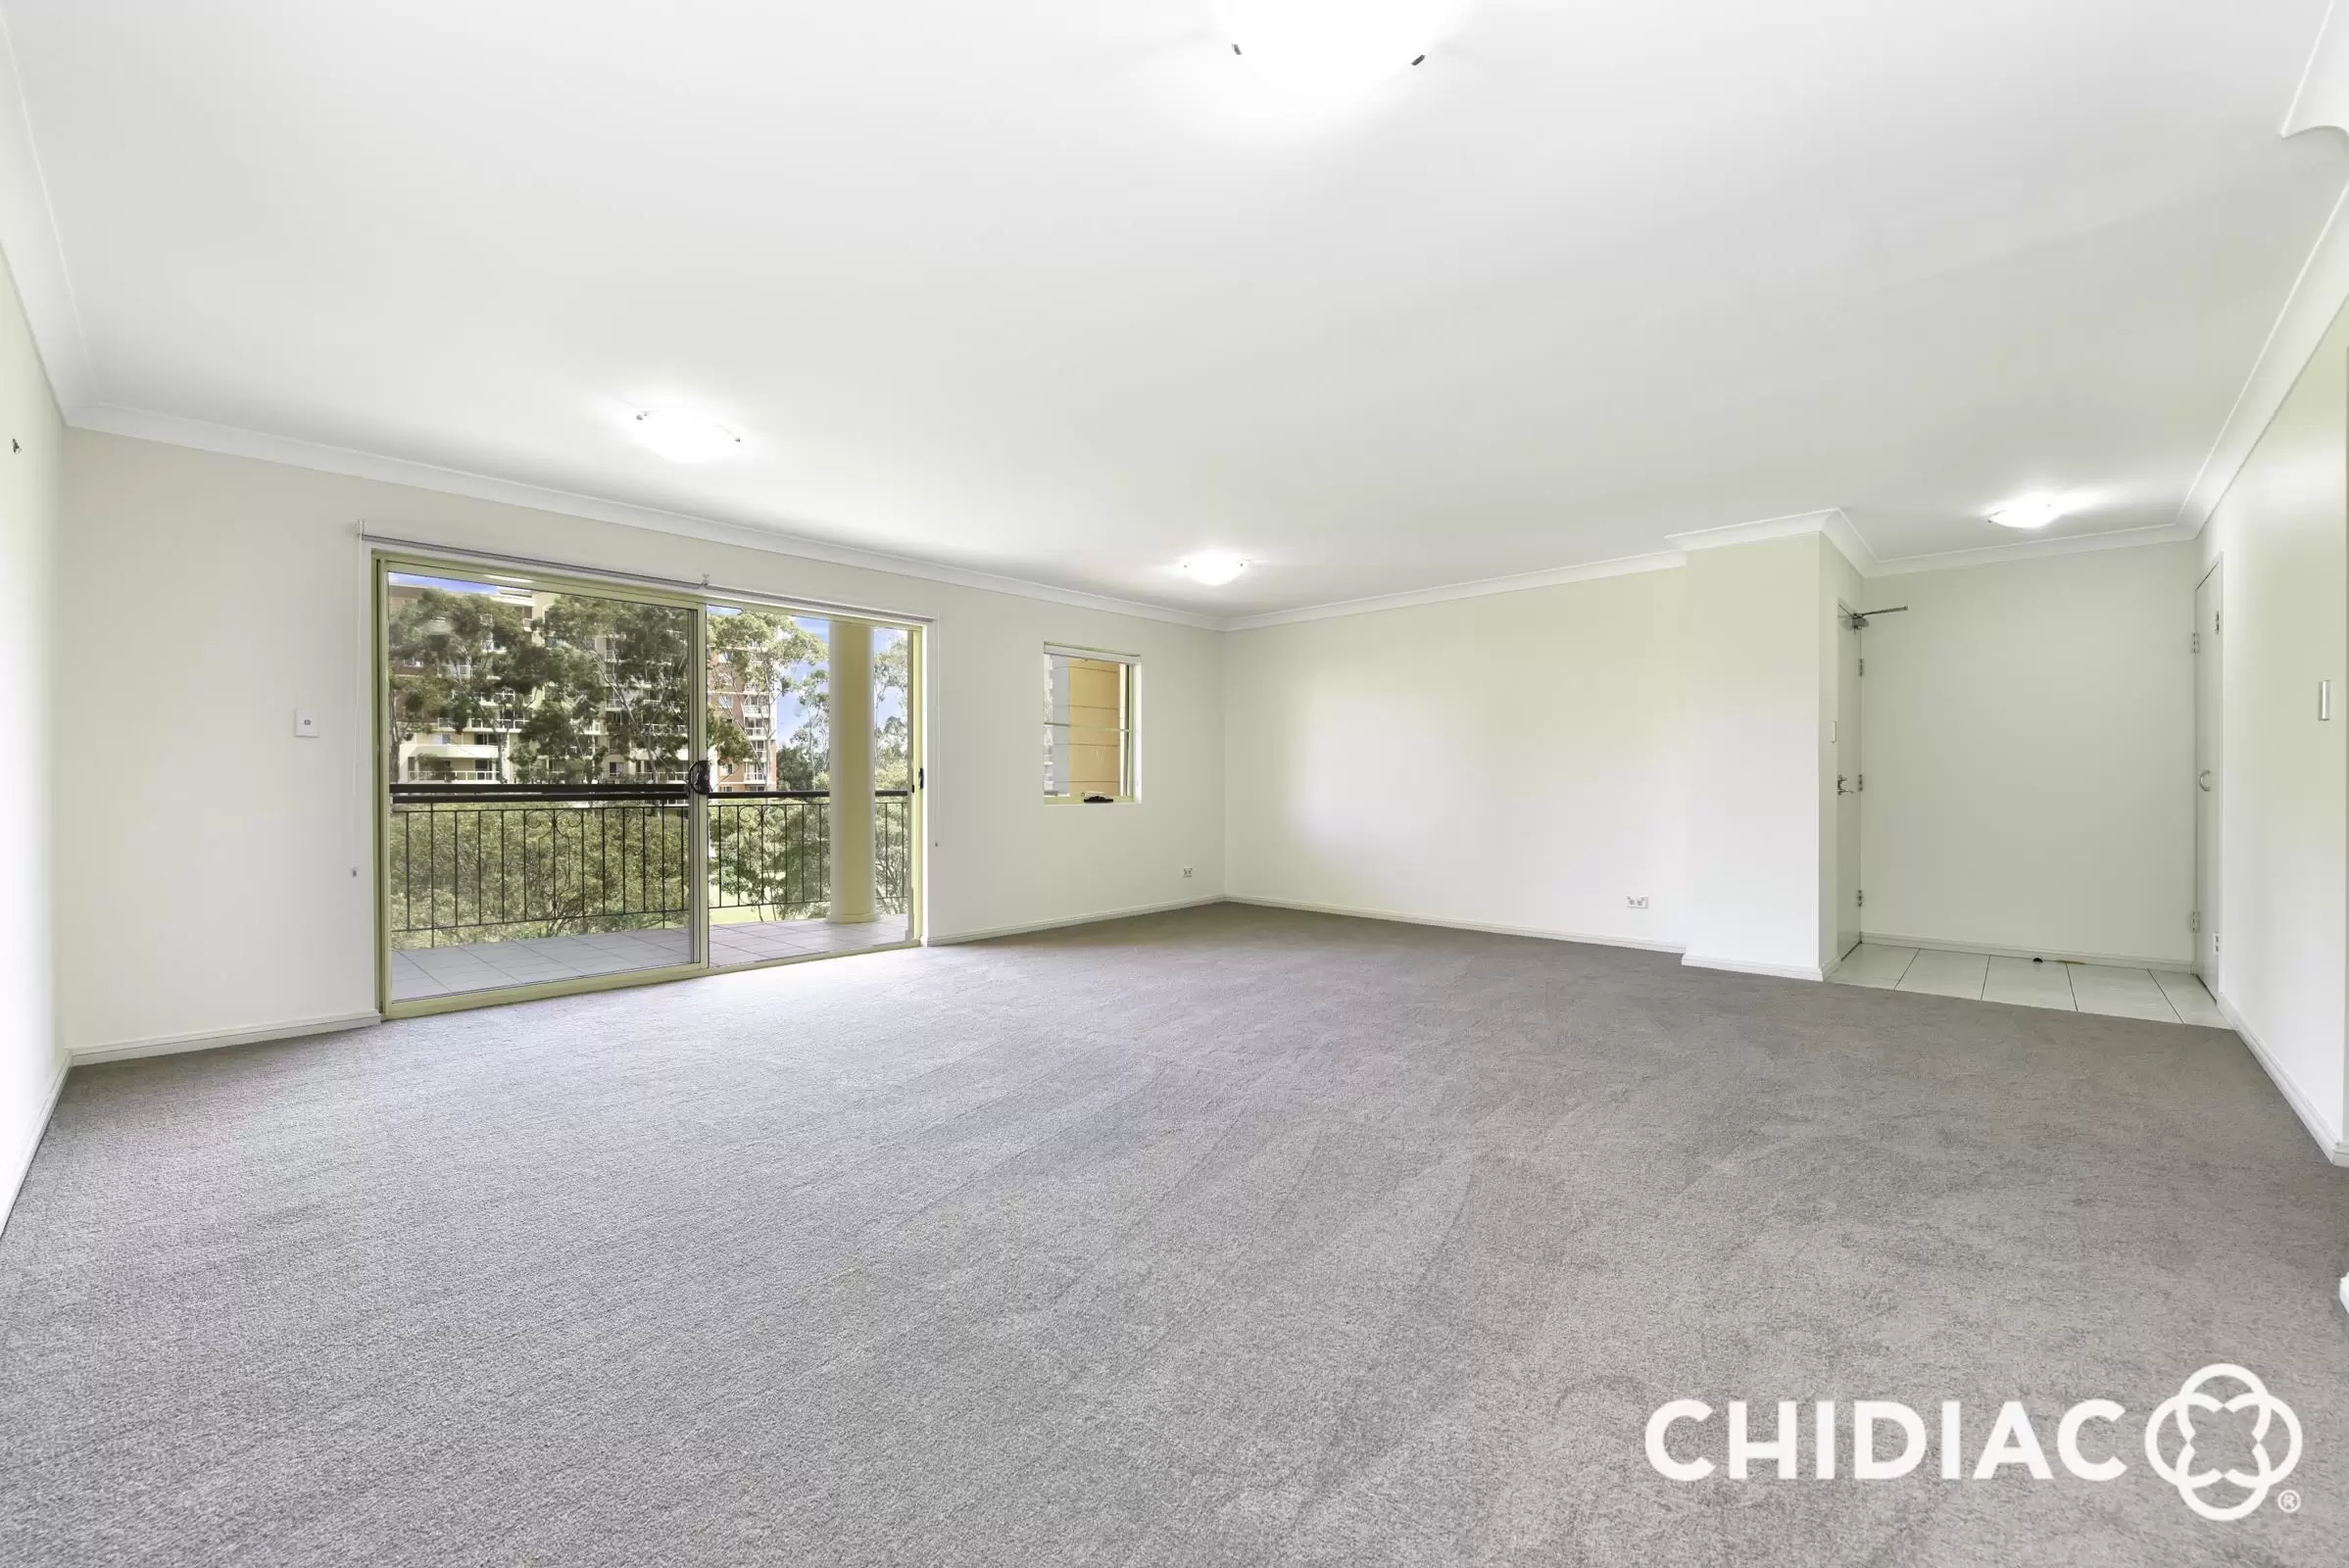 24/1 Bradley Place, Liberty Grove Leased by Chidiac Realty - image 2